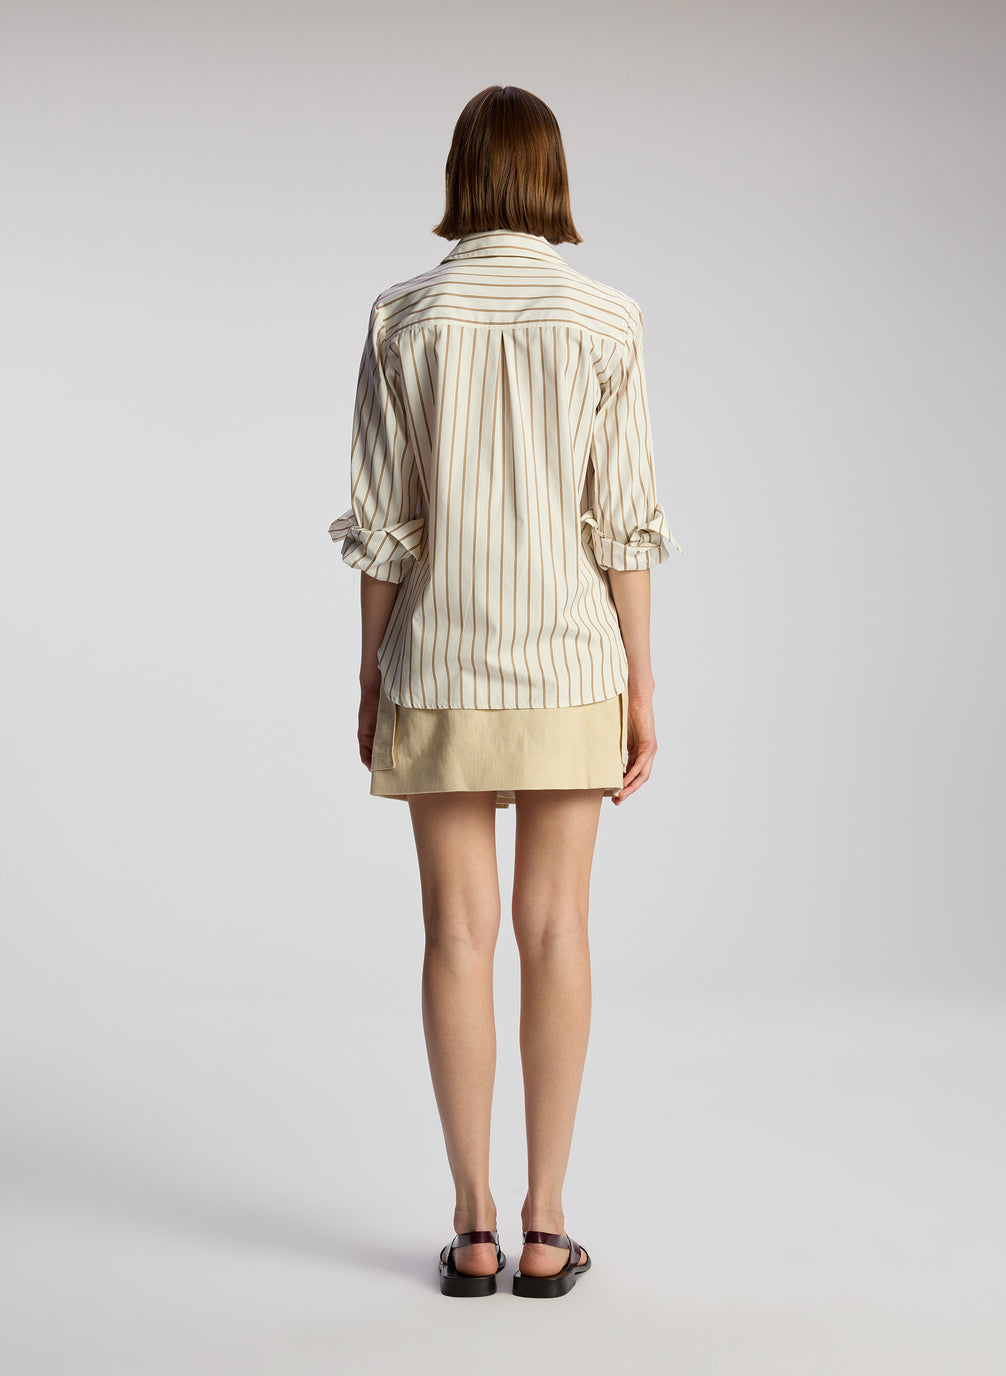 back view of woman wearing brown and white striped shirt and beige mini skirt